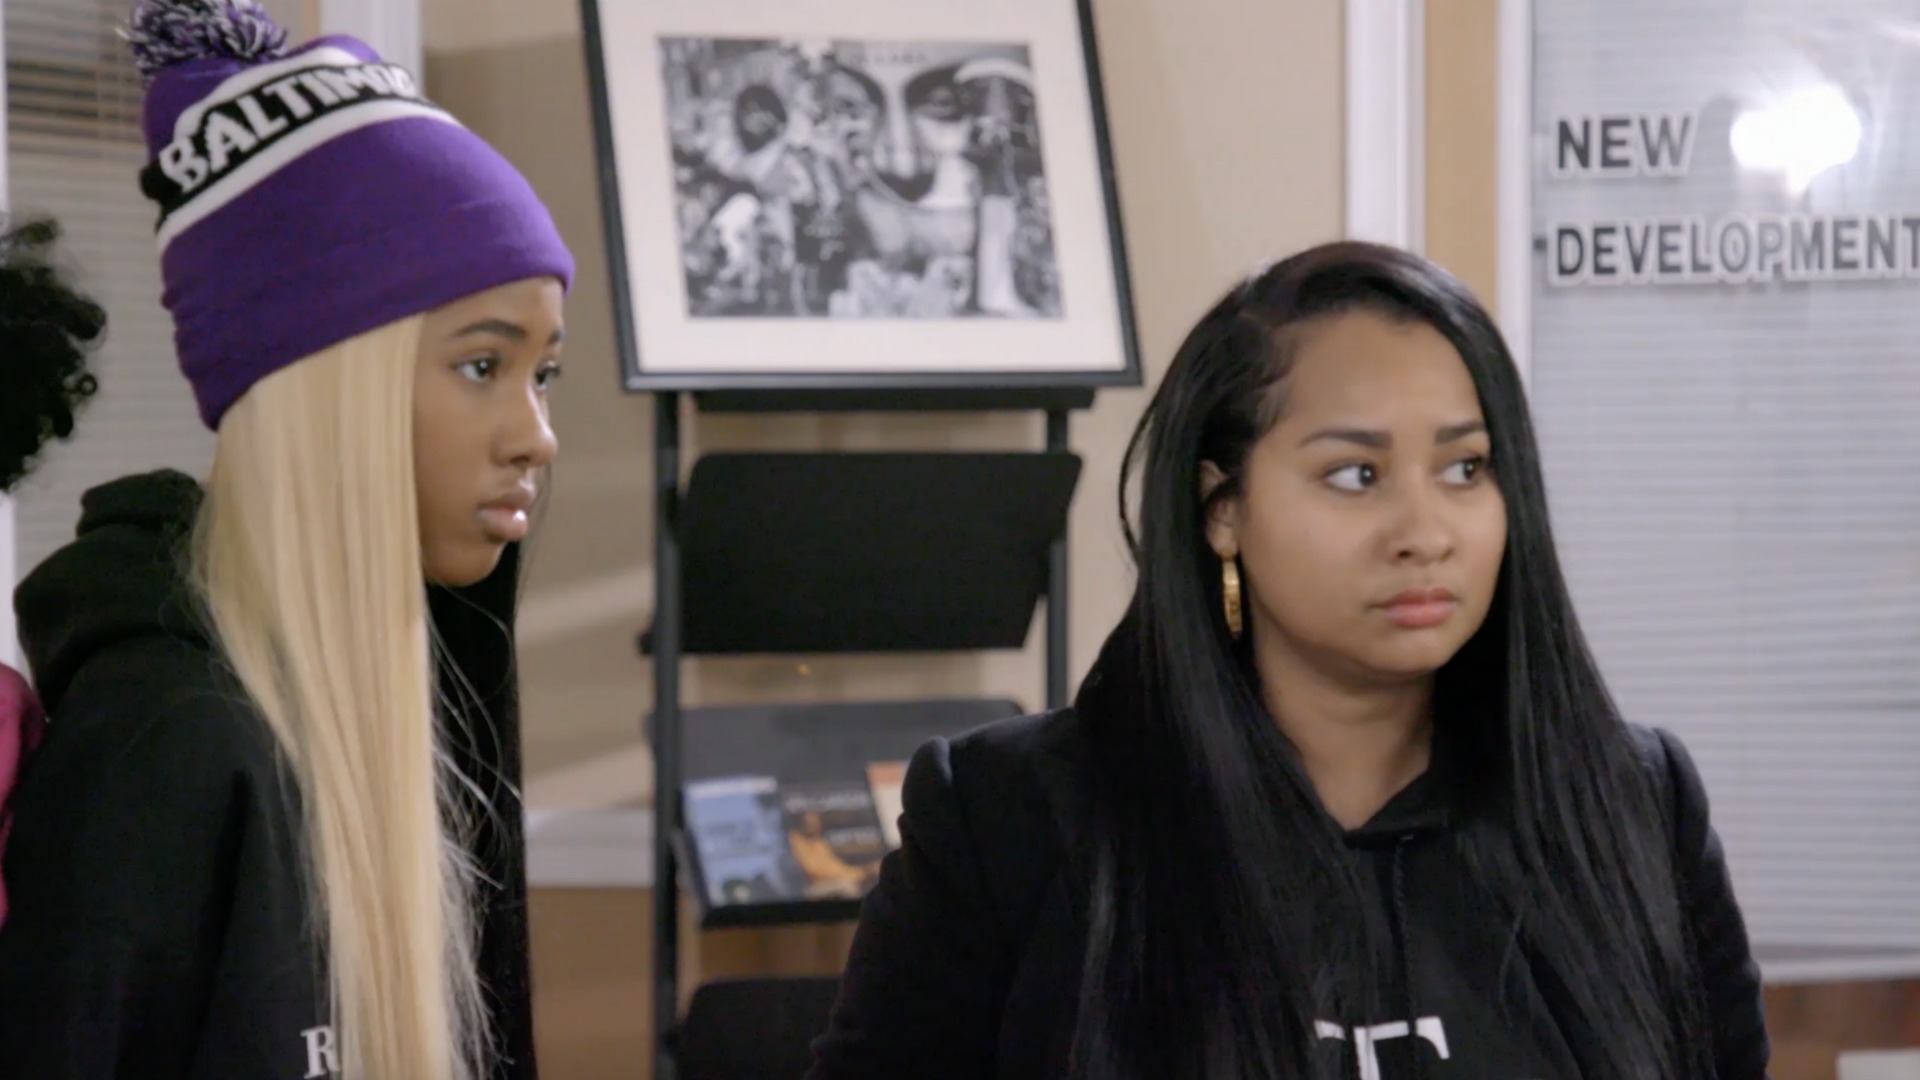 Sneak Peek: Tammy Faces Her Difficult Past